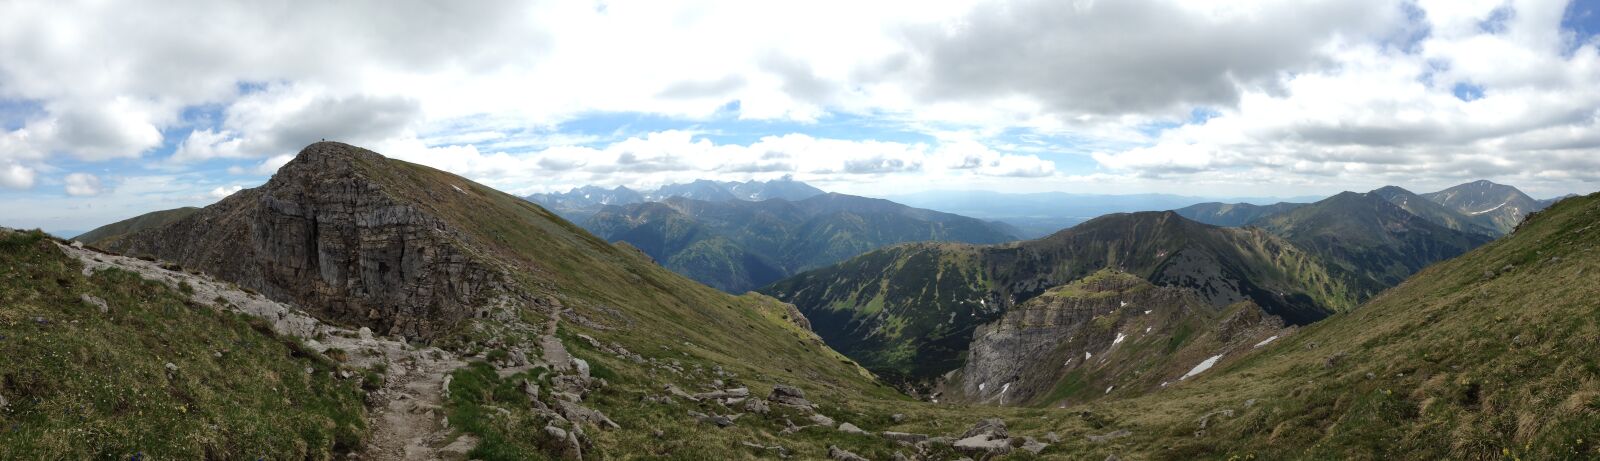 Apple iPhone 5c sample photo. Mountains, tatry, tourism photography